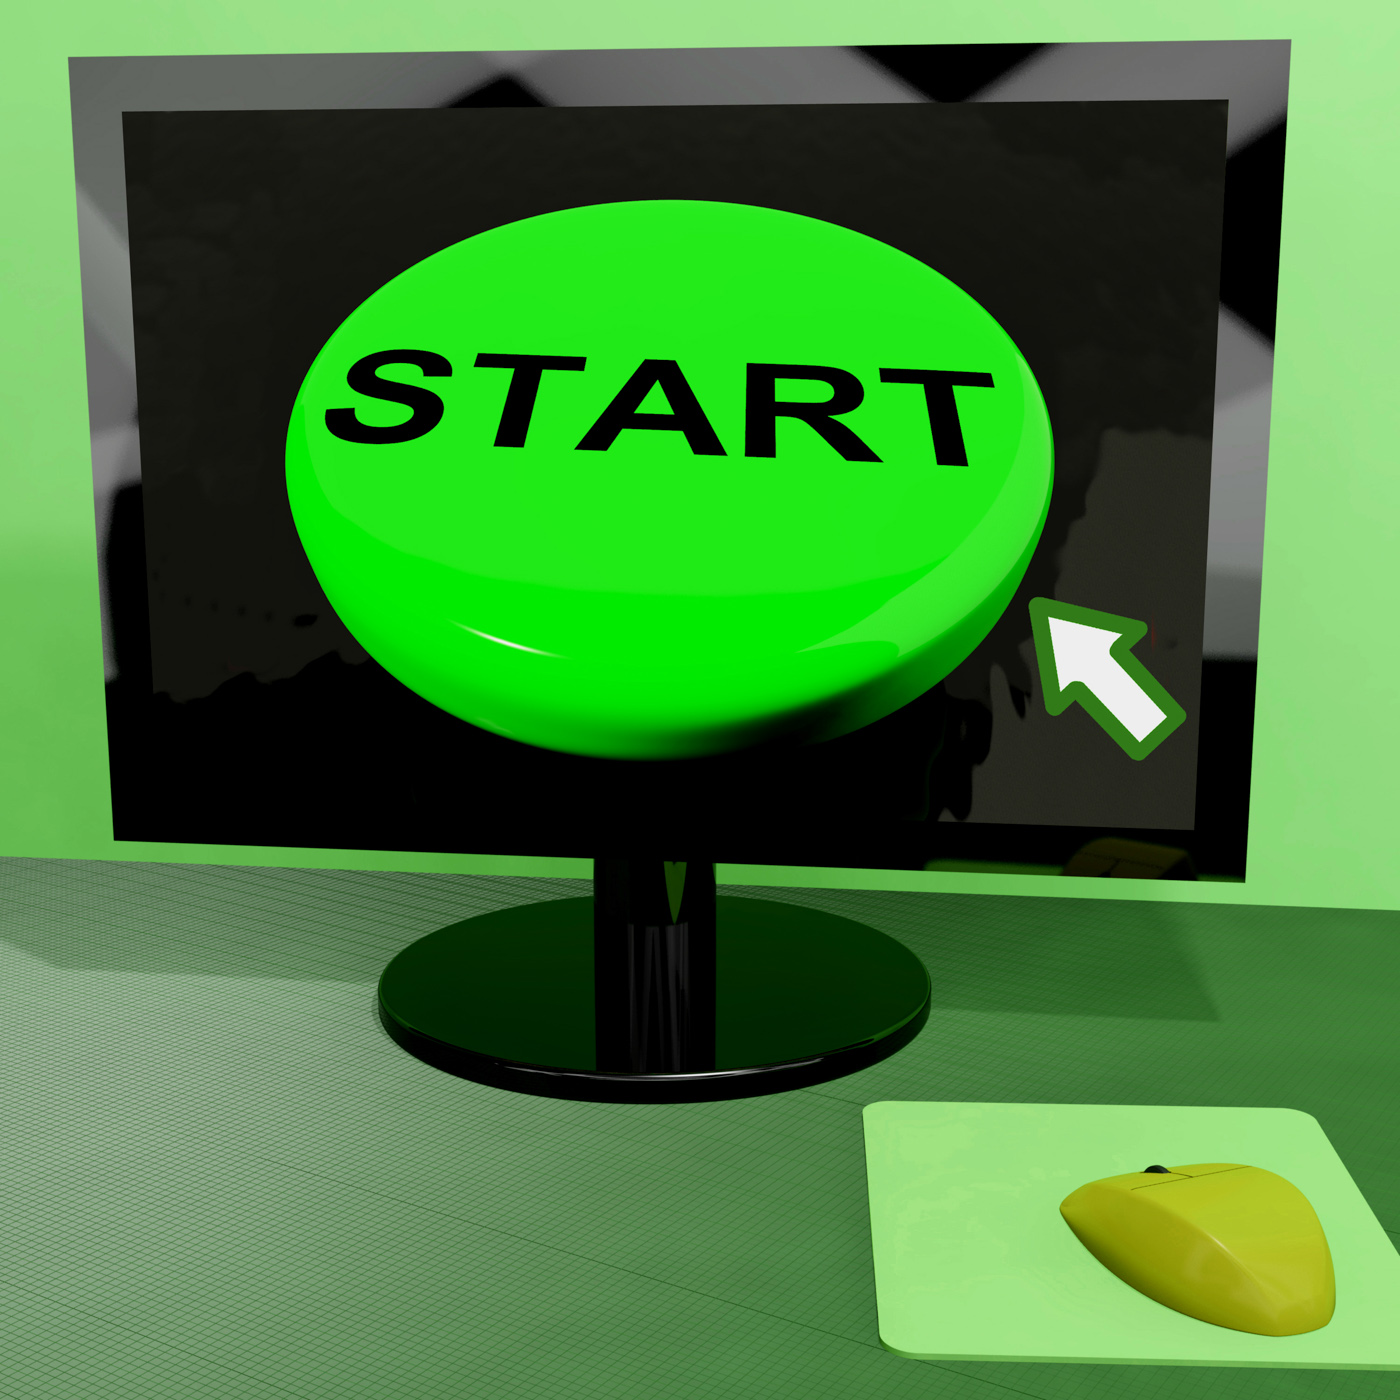 Start Button On Computer Shows Control Or Activating, Activate, Begin, Button, Computer, HQ Photo